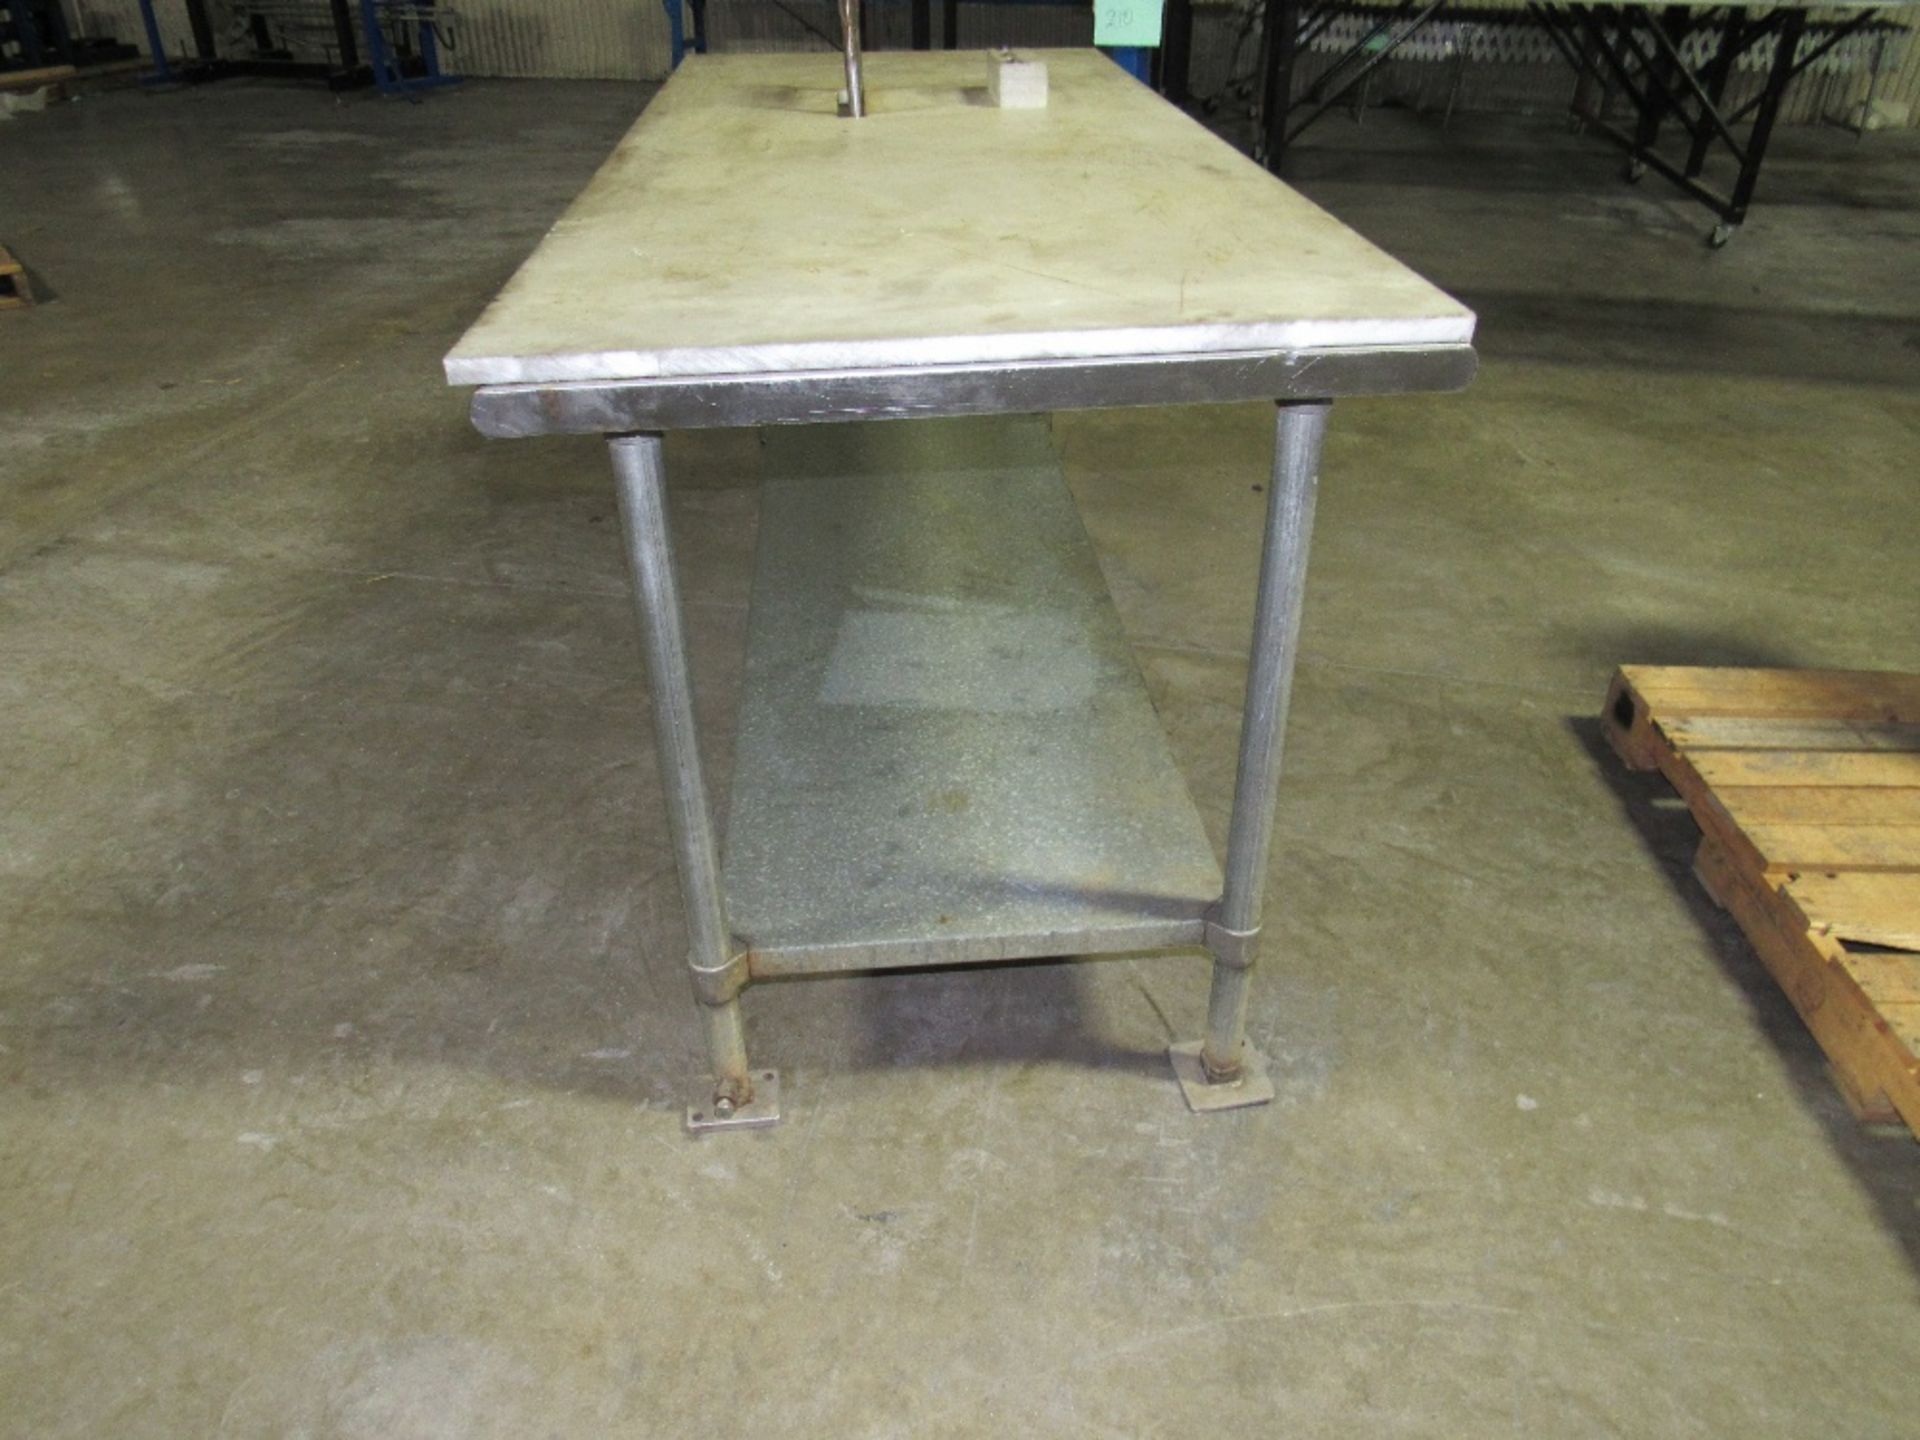 Stainless Steel Table with Teflon removable Plate Cover - Galvanized second surface -- (RIGGING - Image 8 of 14